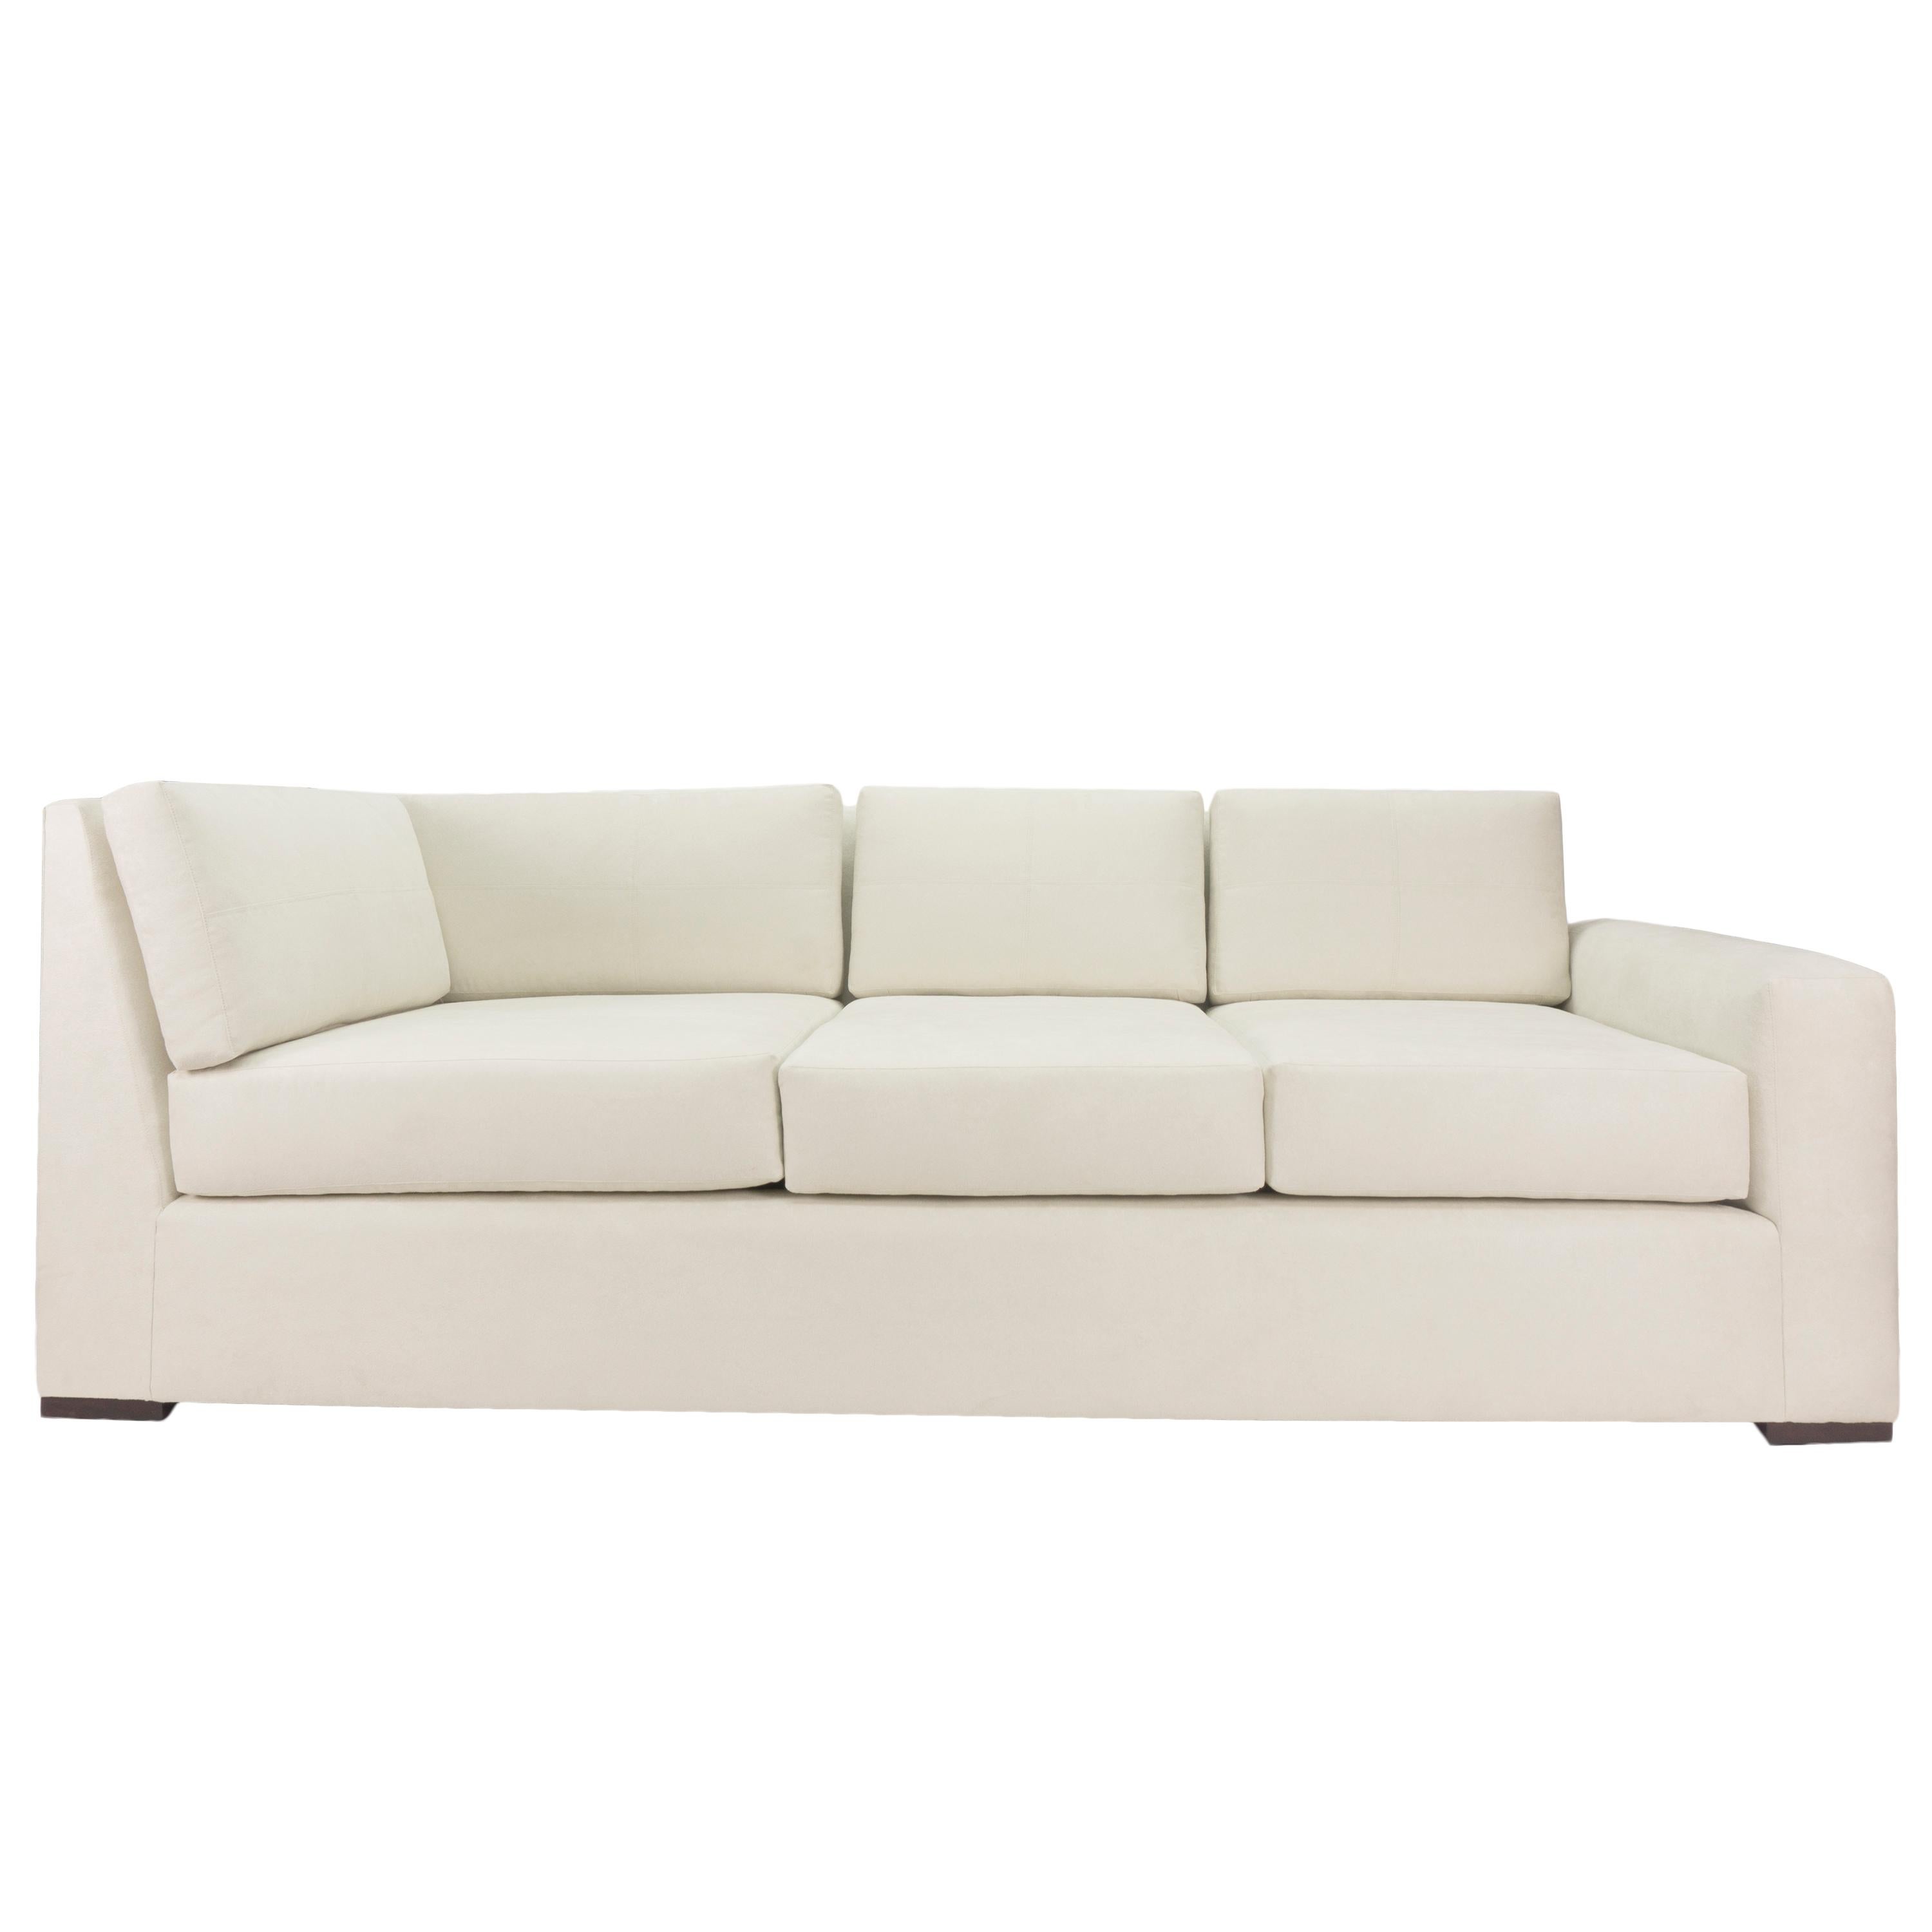 Square Arm Loose Cushion Sectional Sofa, Customizable For Sale 2